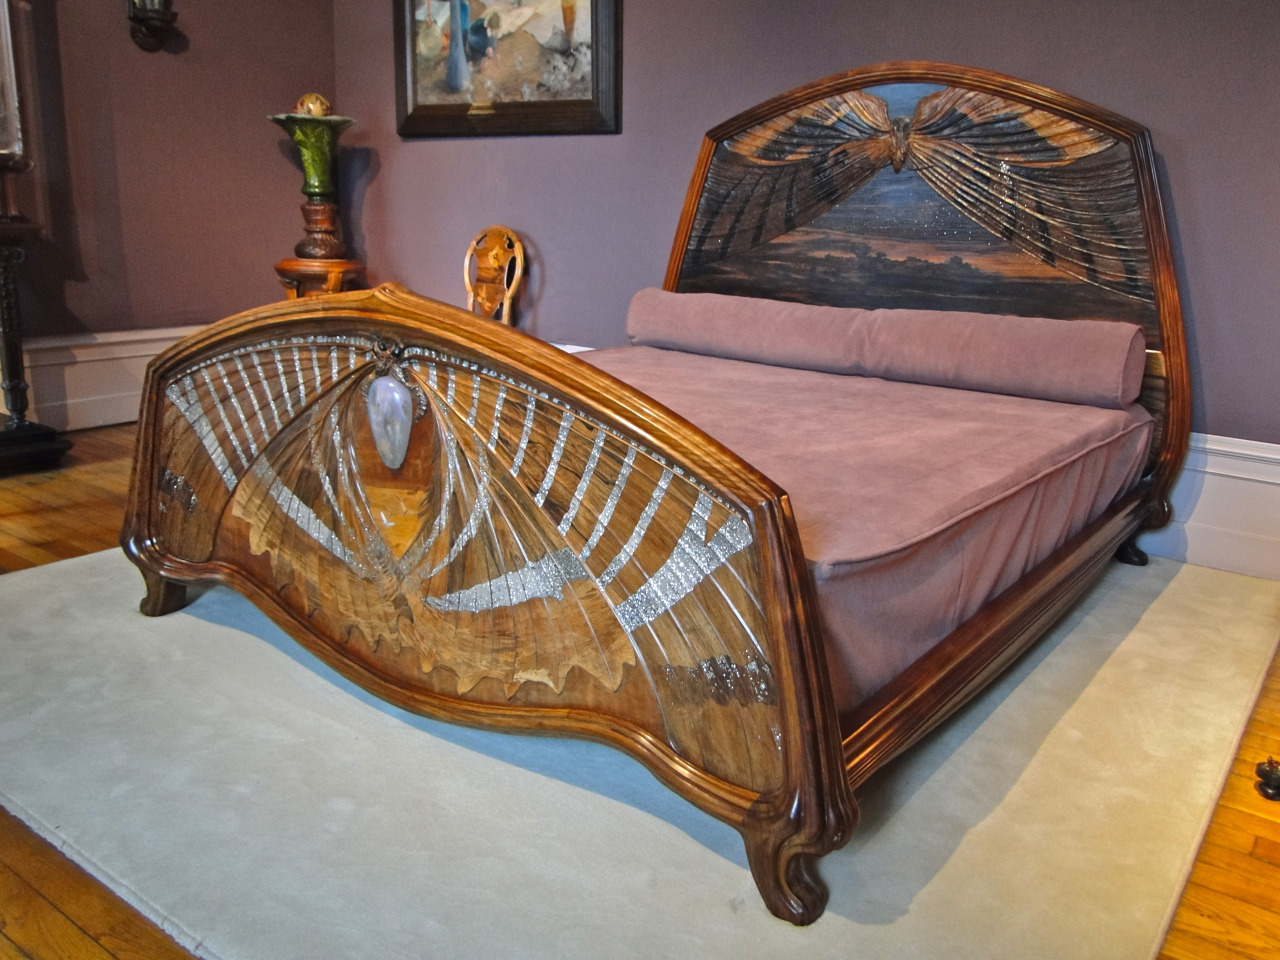 artnouveaustyle:  This is the Lit Aube et Crépuscule (Dawn and Twilight bed) by